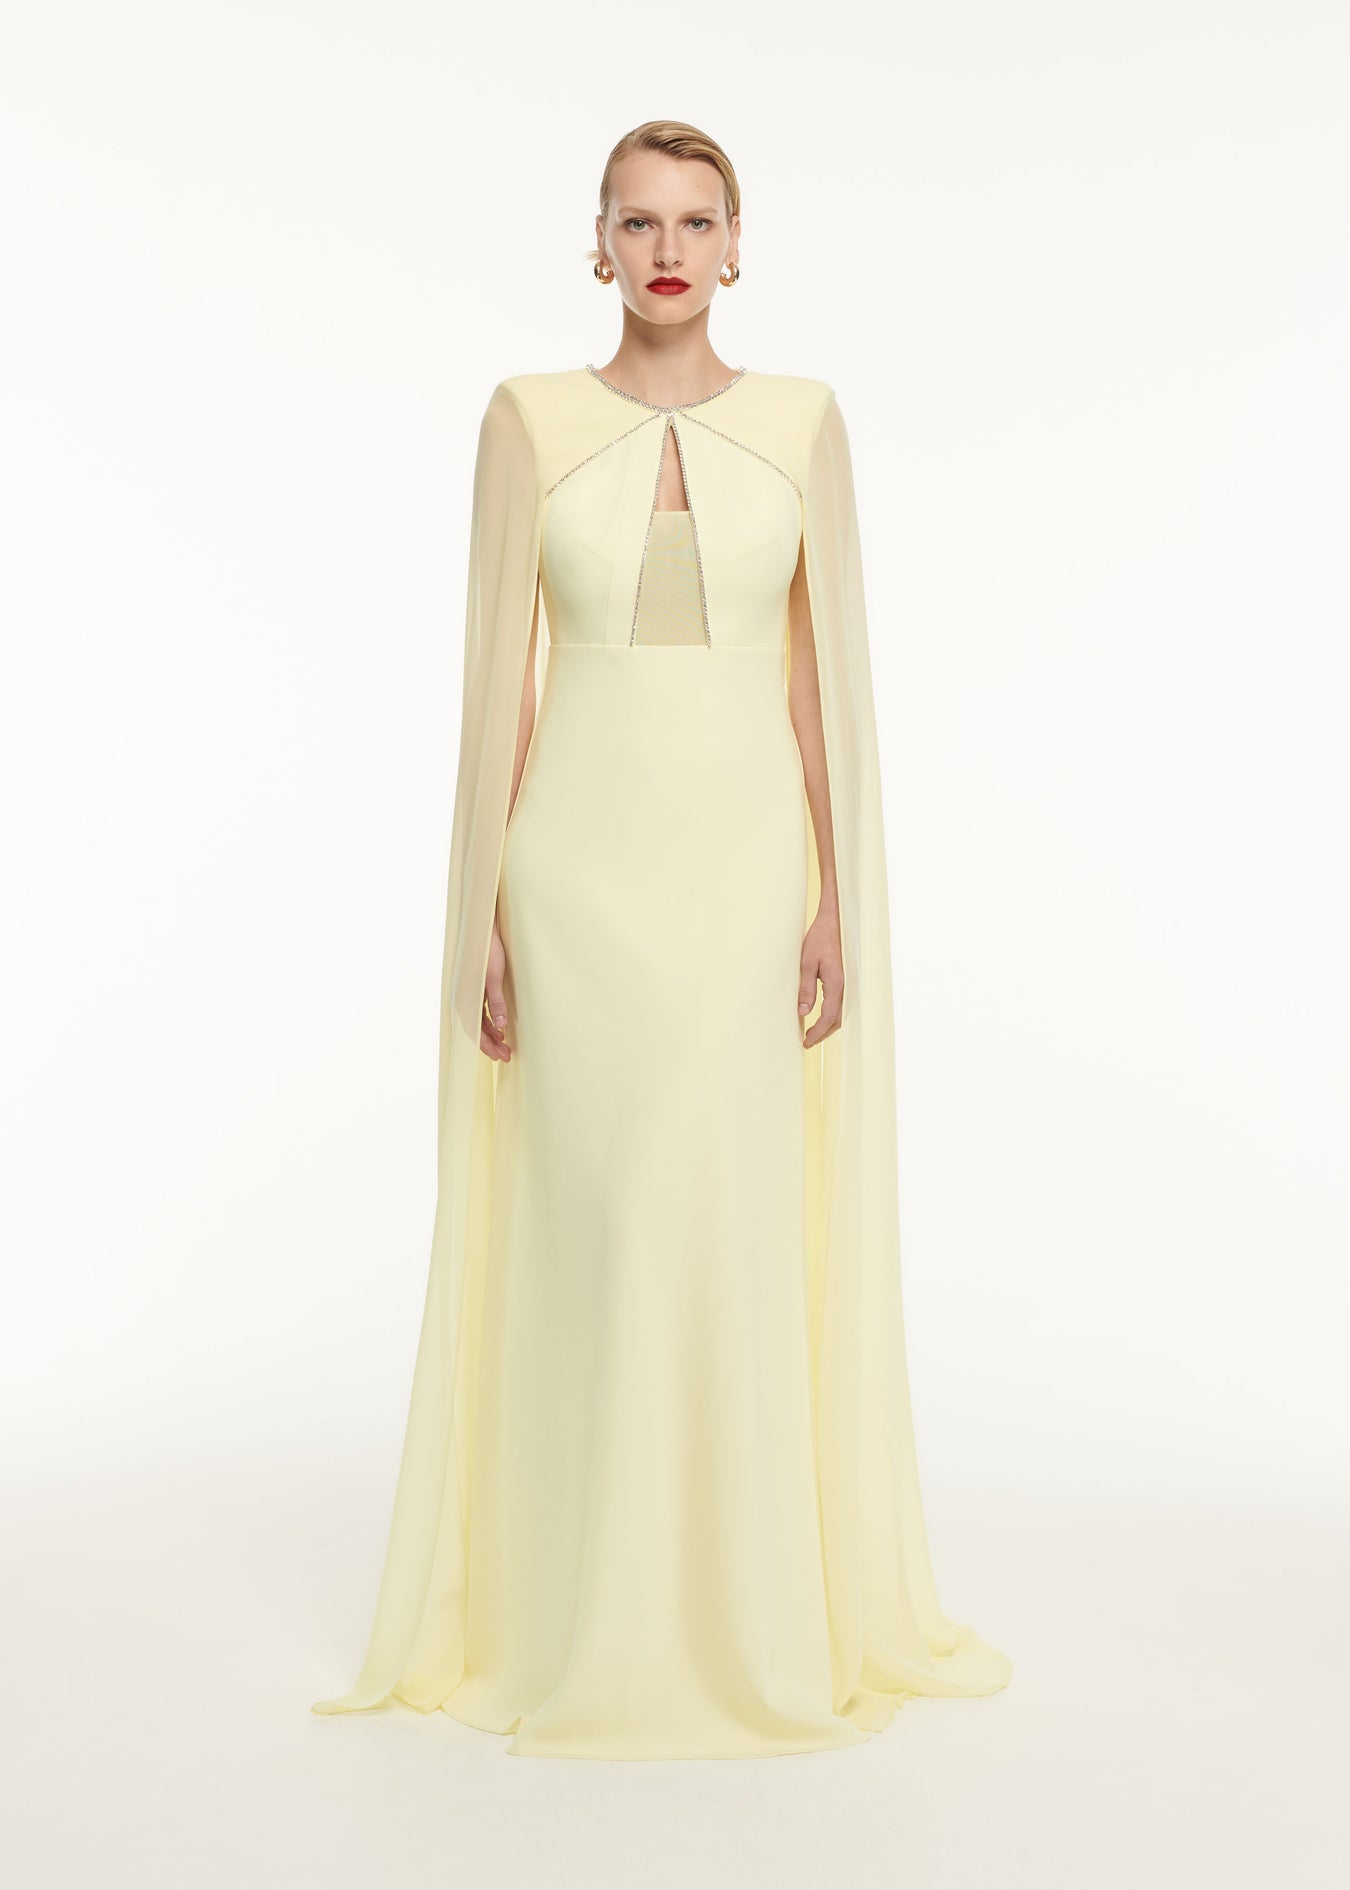 A woman wearing the Stretch Cady Gown in Yellow